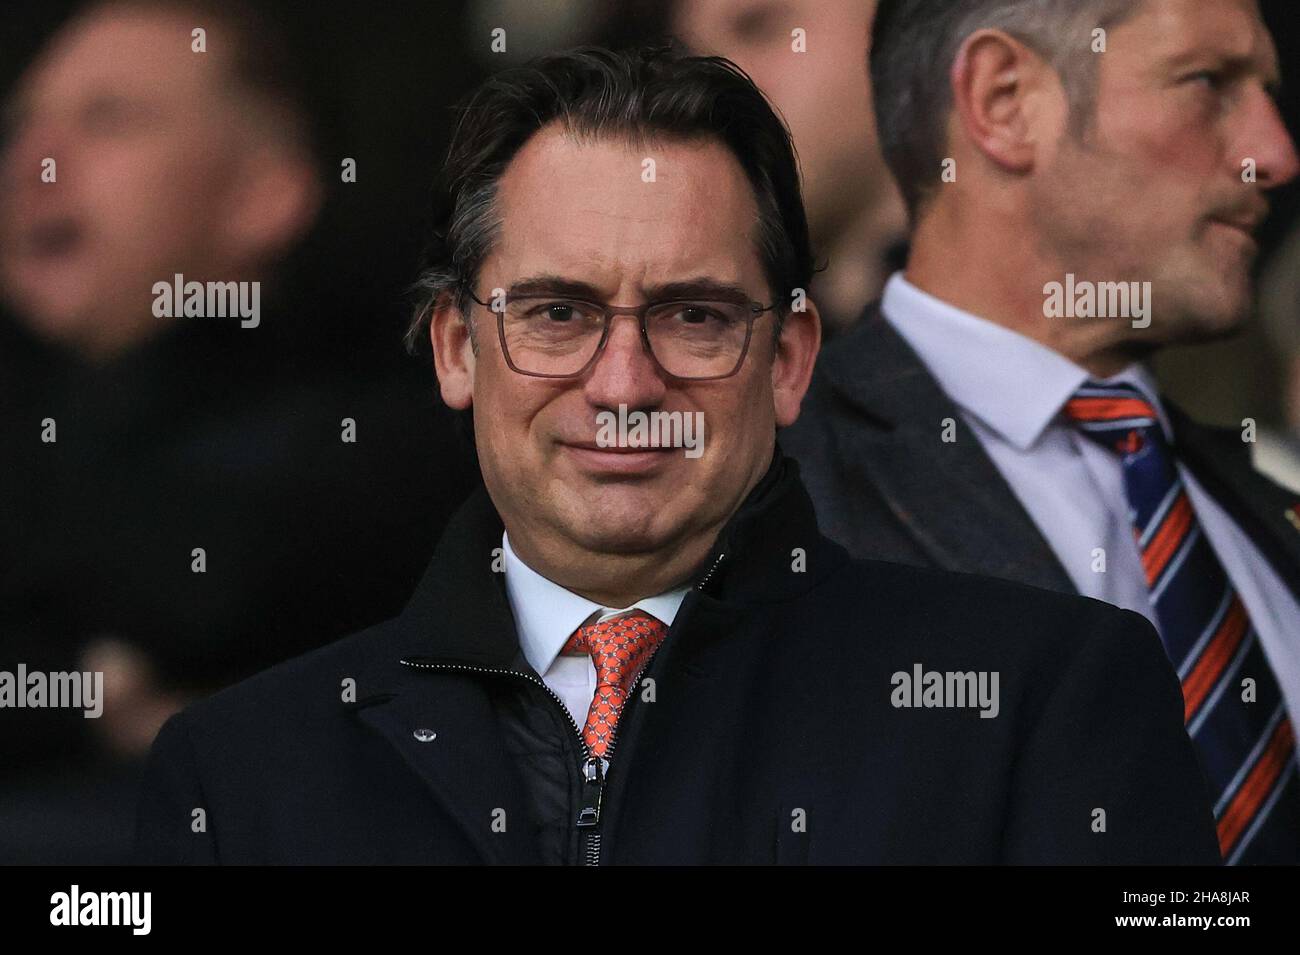 Derby, UK. 11th Dec, 2021. Simon Sadler owner of Blackpool Football Club is in attendance in Derby, United Kingdom on 12/11/2021. (Photo by Mark Cosgrove/News Images/Sipa USA) Credit: Sipa USA/Alamy Live News Stock Photo